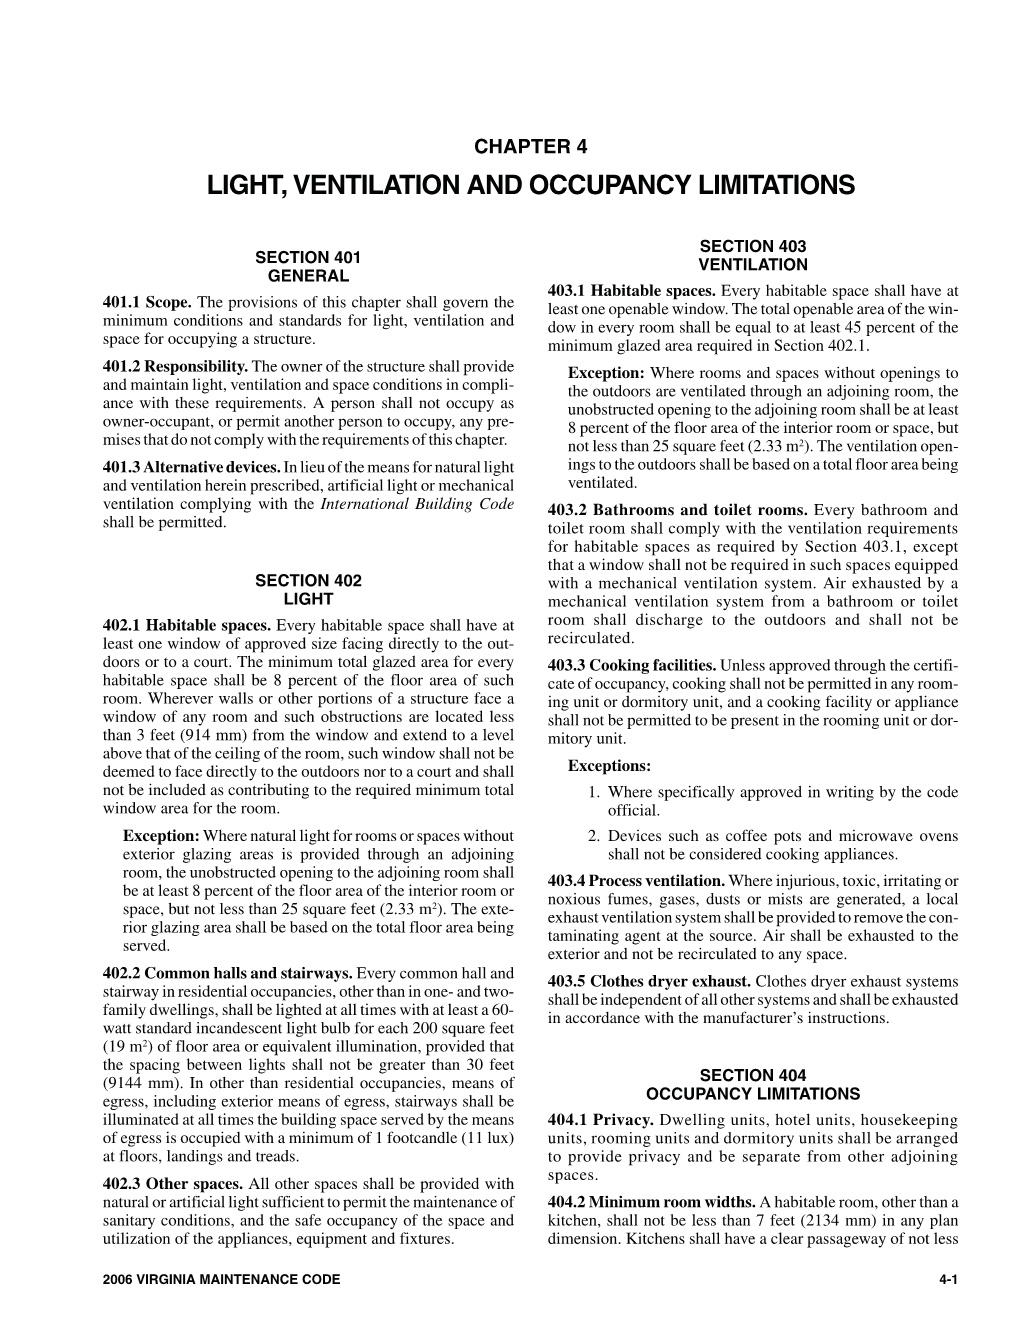 Chapter 4 Light, Ventilation and Occupancy Limitations